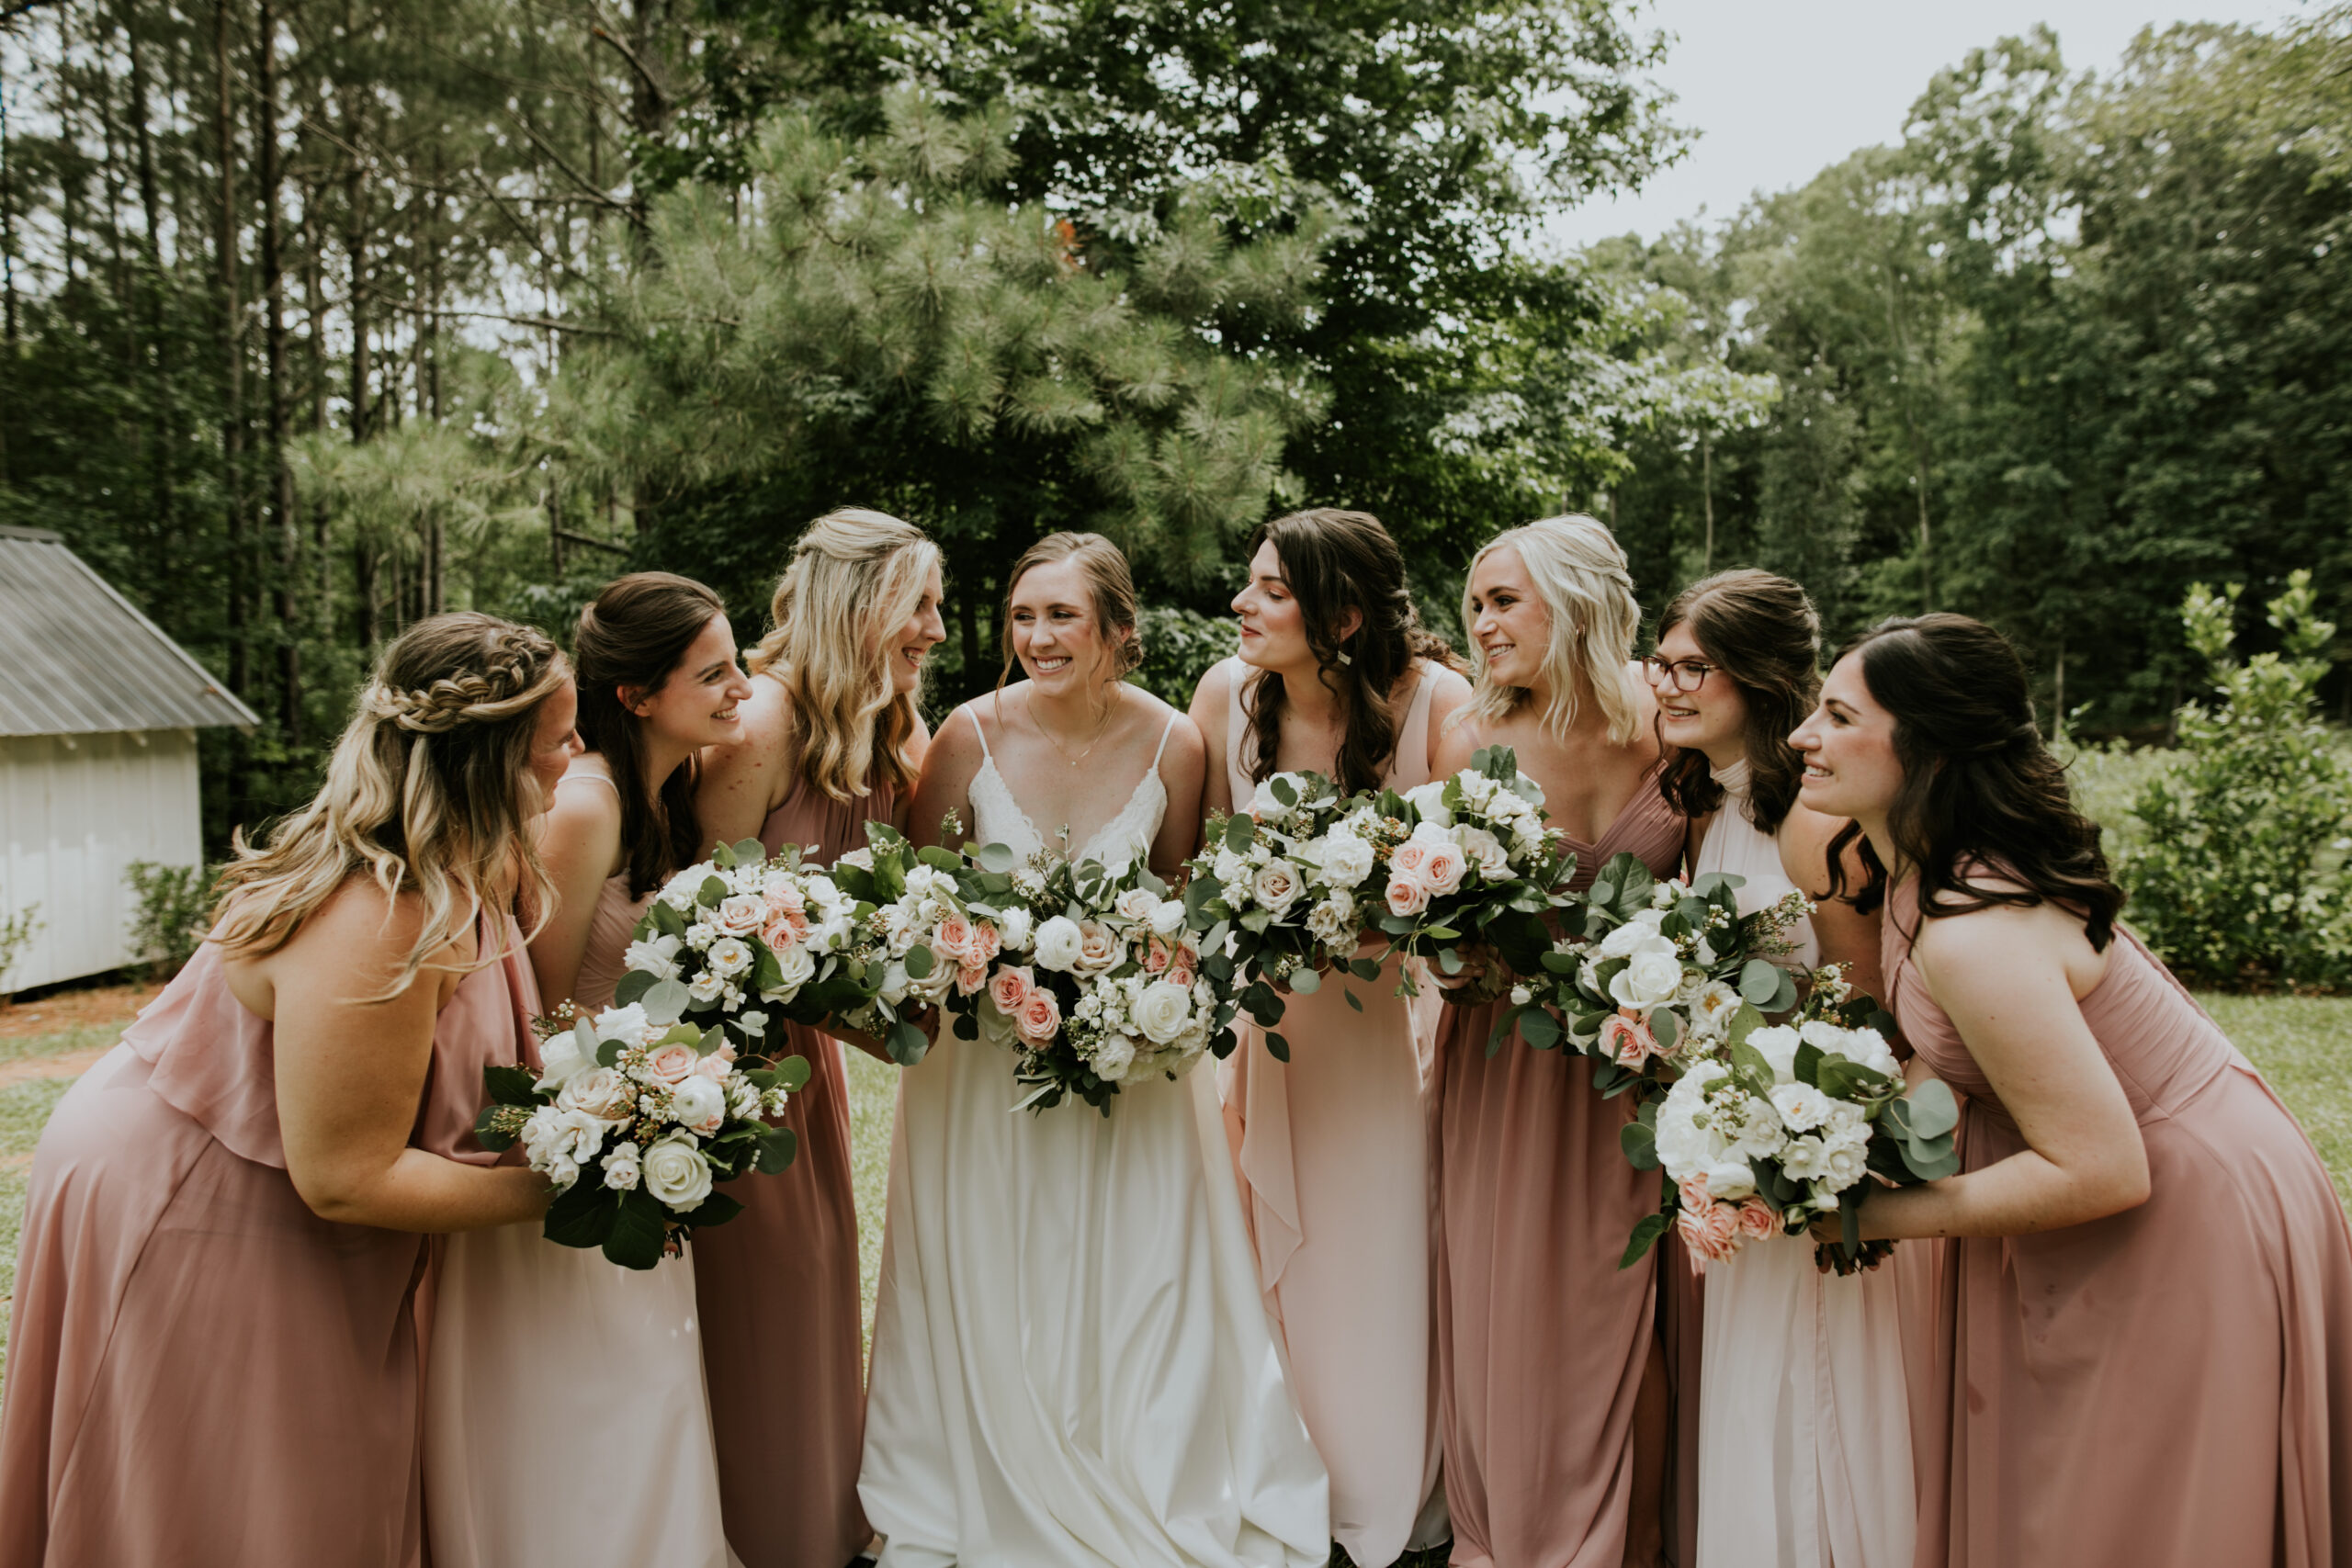 Bride with bridesmaids wearing shades of pink dresses with florals